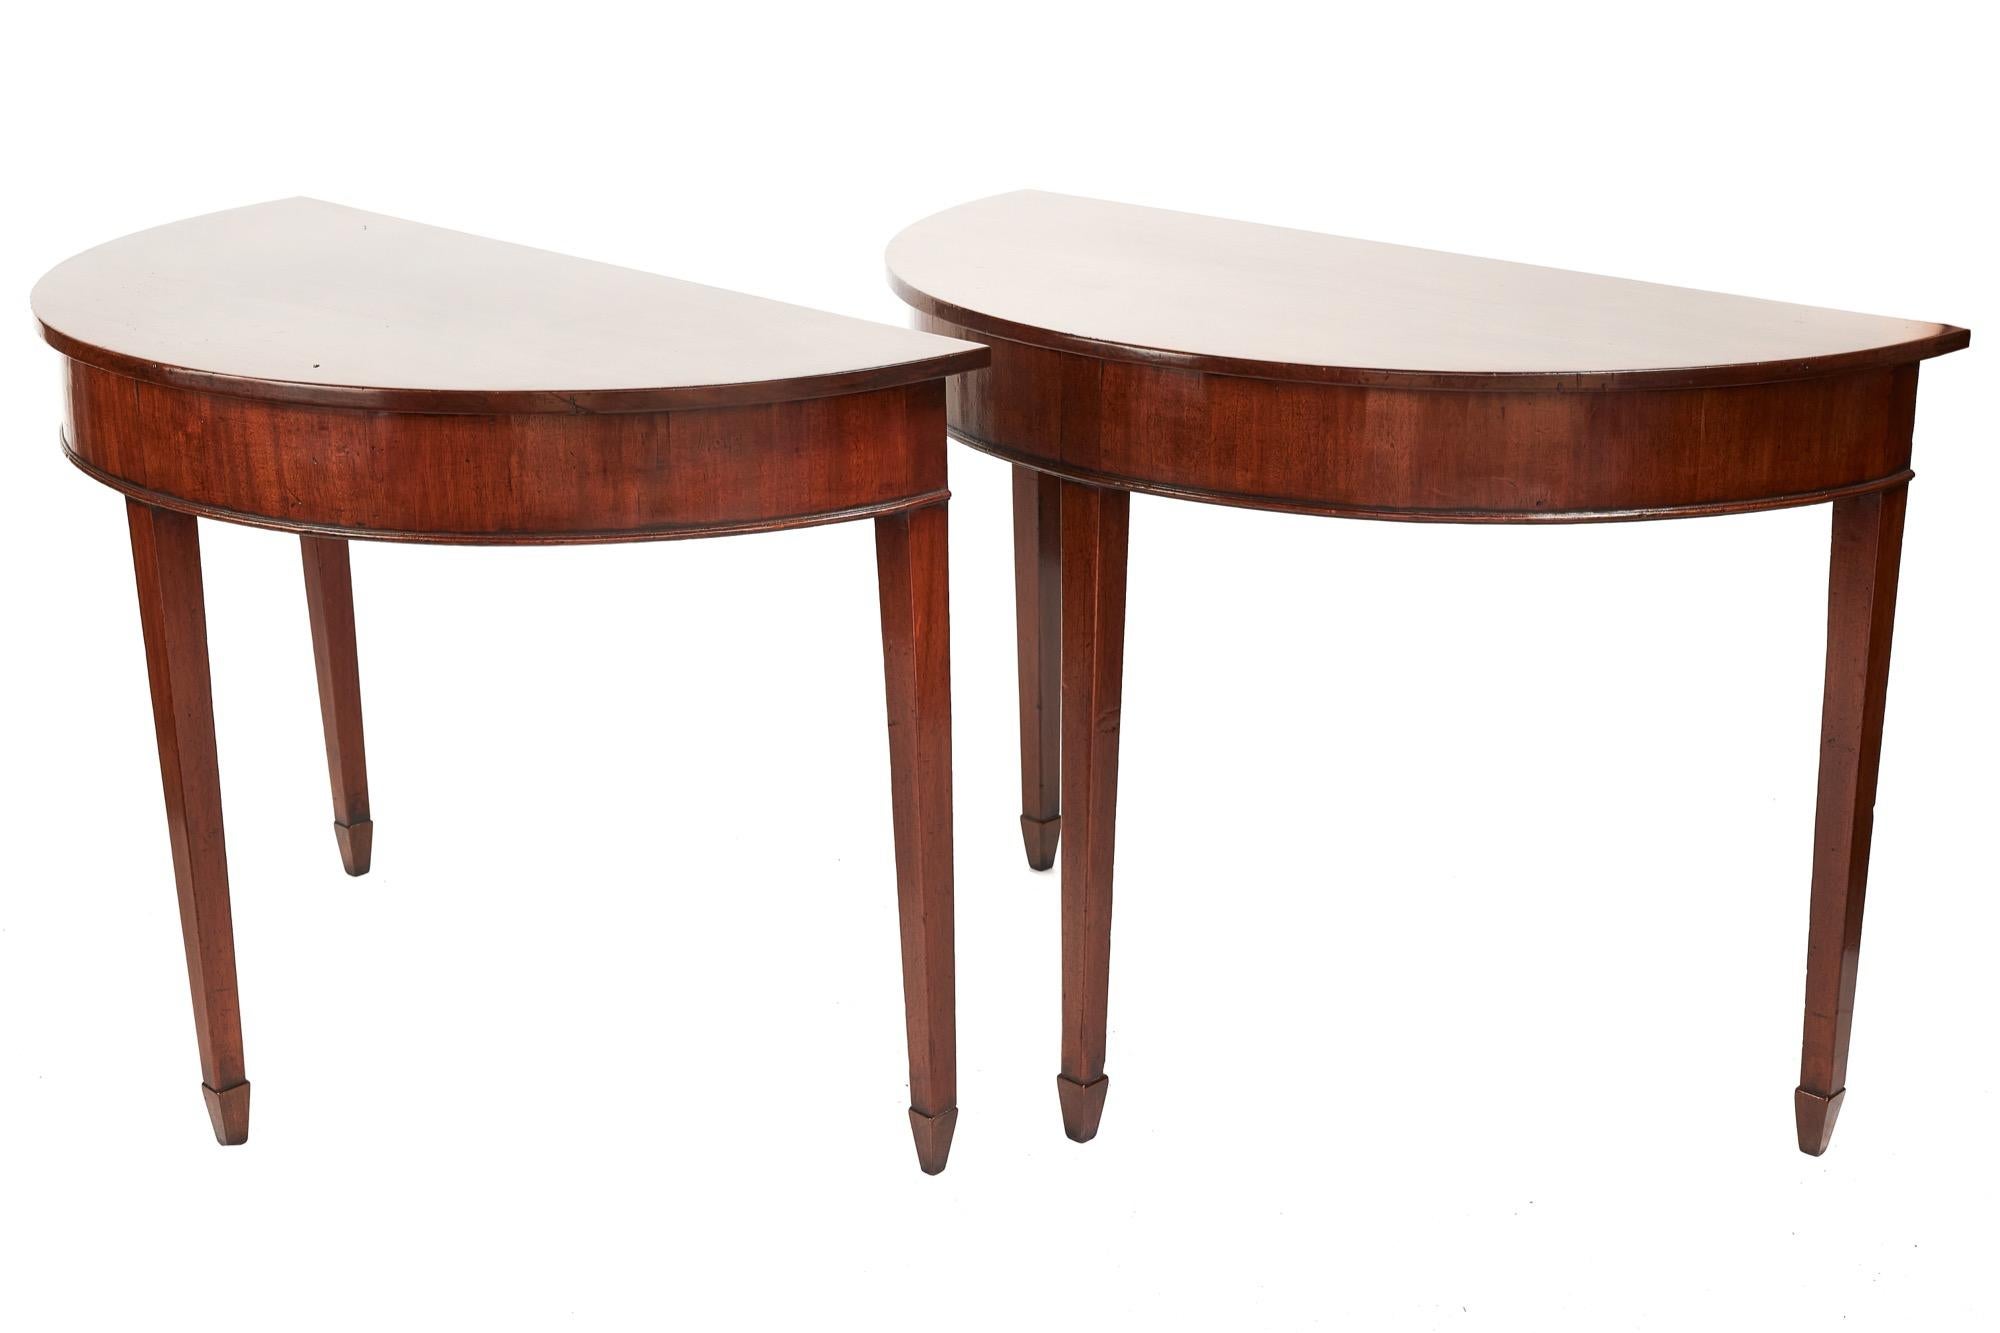 Antique pair of George III demilune mahogany console tables having very appealing mahogany tops each with three attractive mahogany tapering legs and terminating in spade feet.

A lovely Classic pair of the period in wonderful original condition.